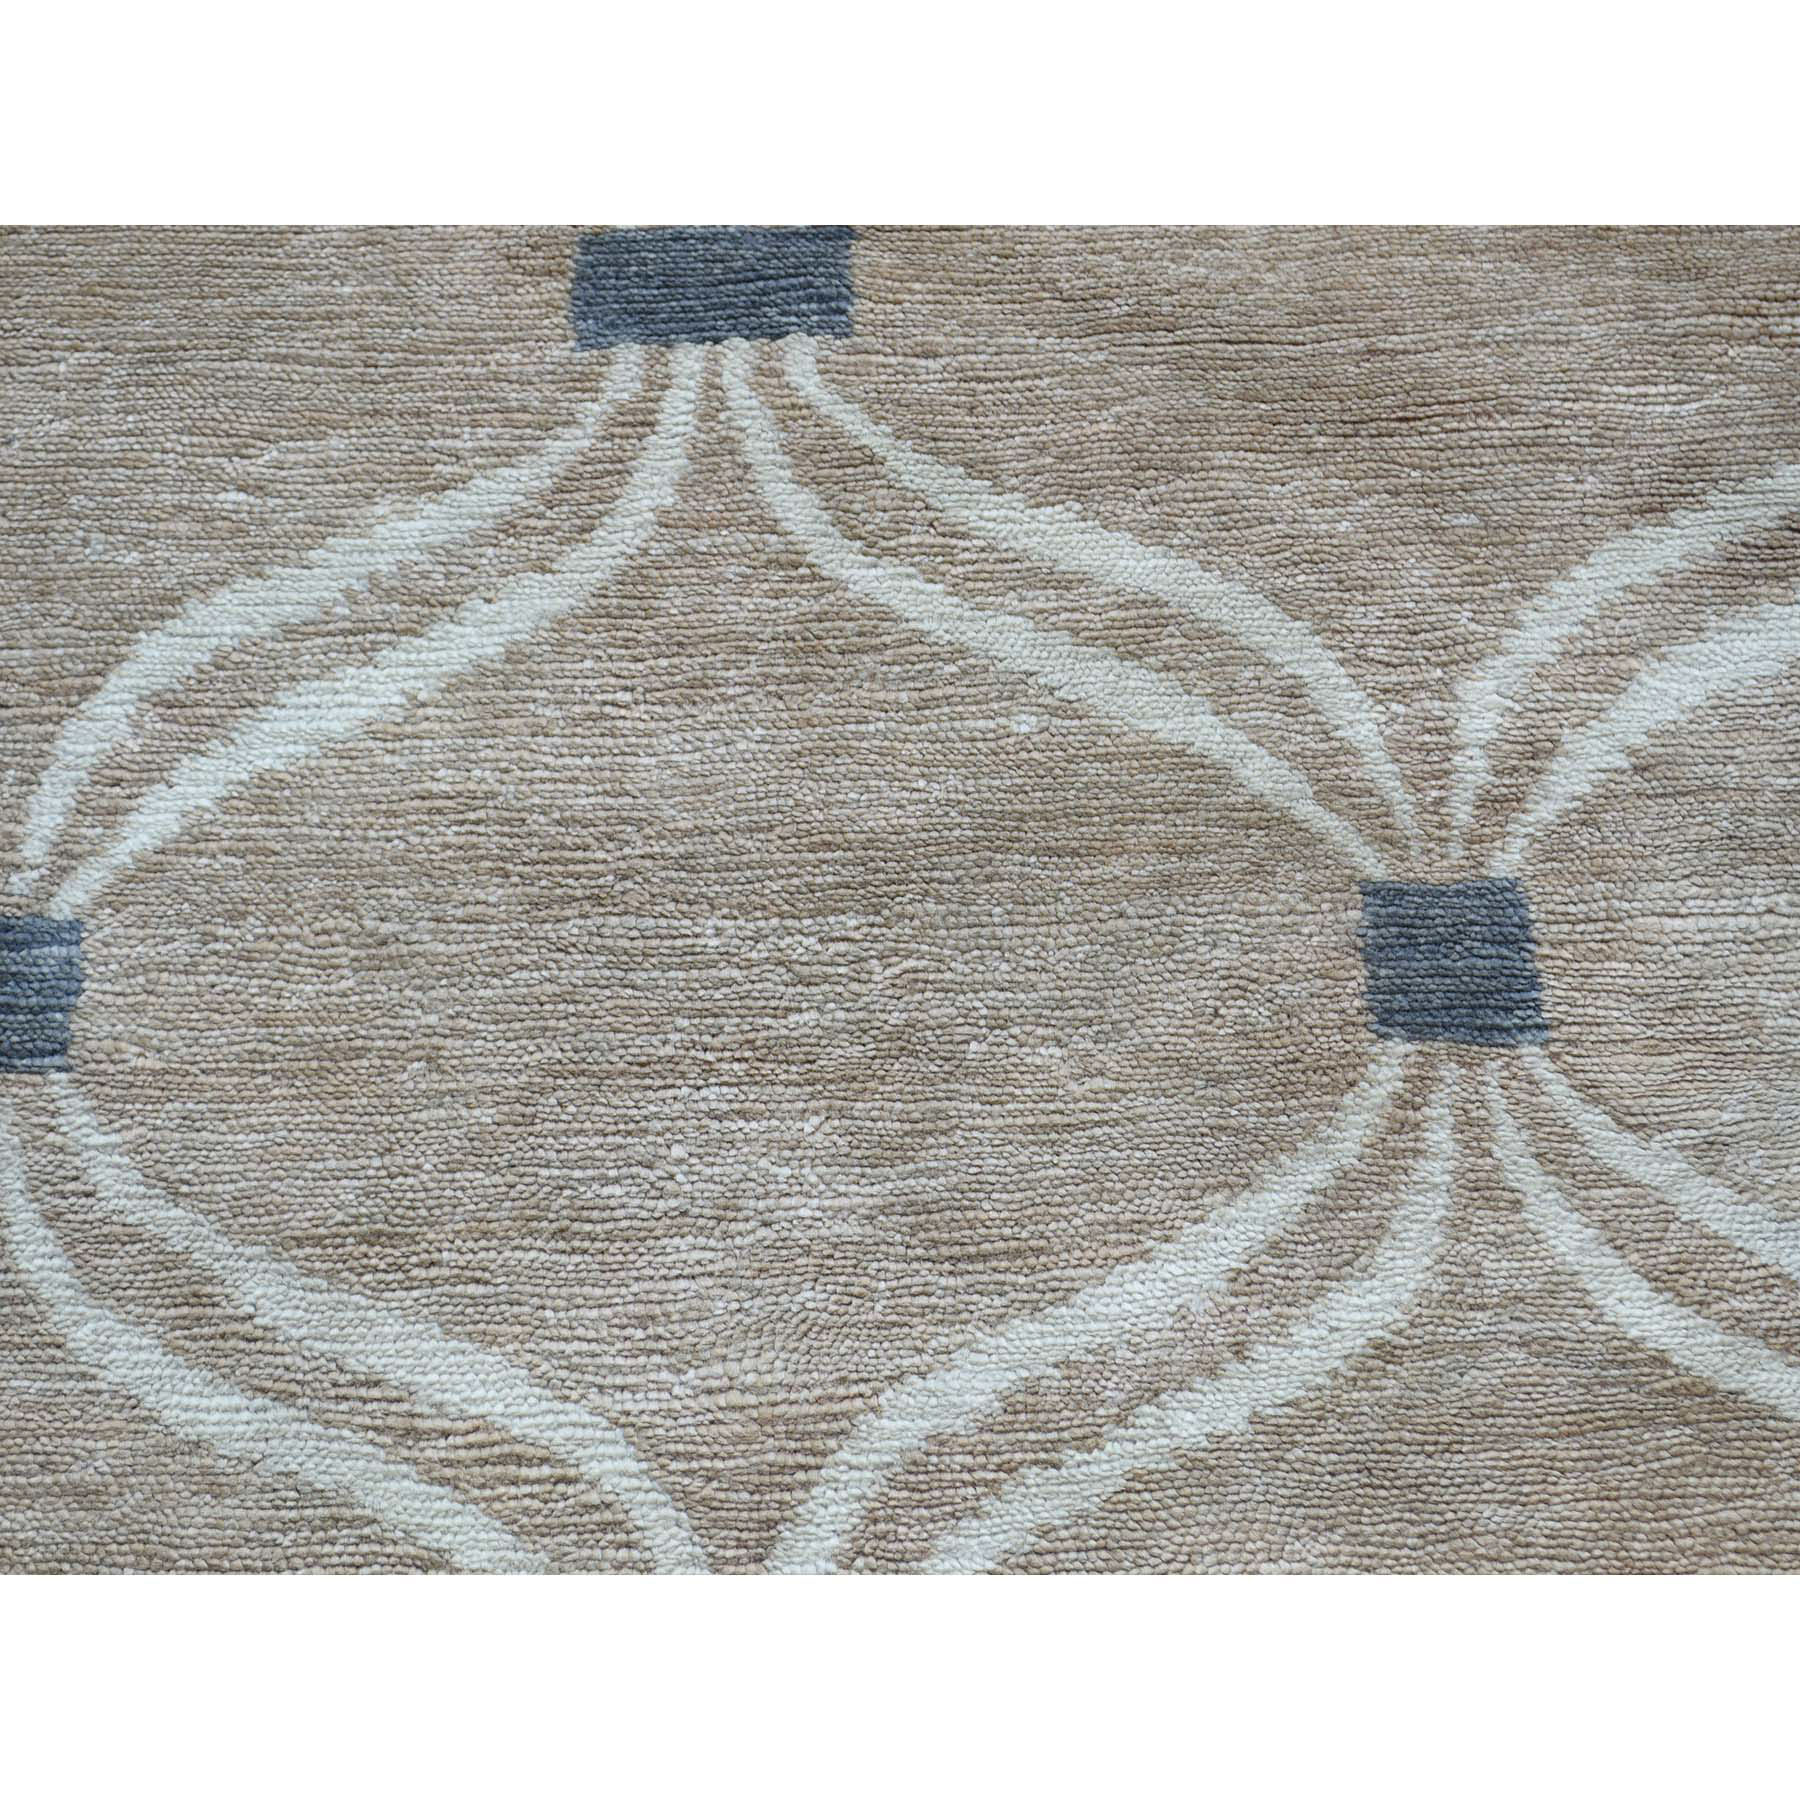 2-x3- Hand-Knotted Wool And Silk Modern Design Taupe Oriental Rug 